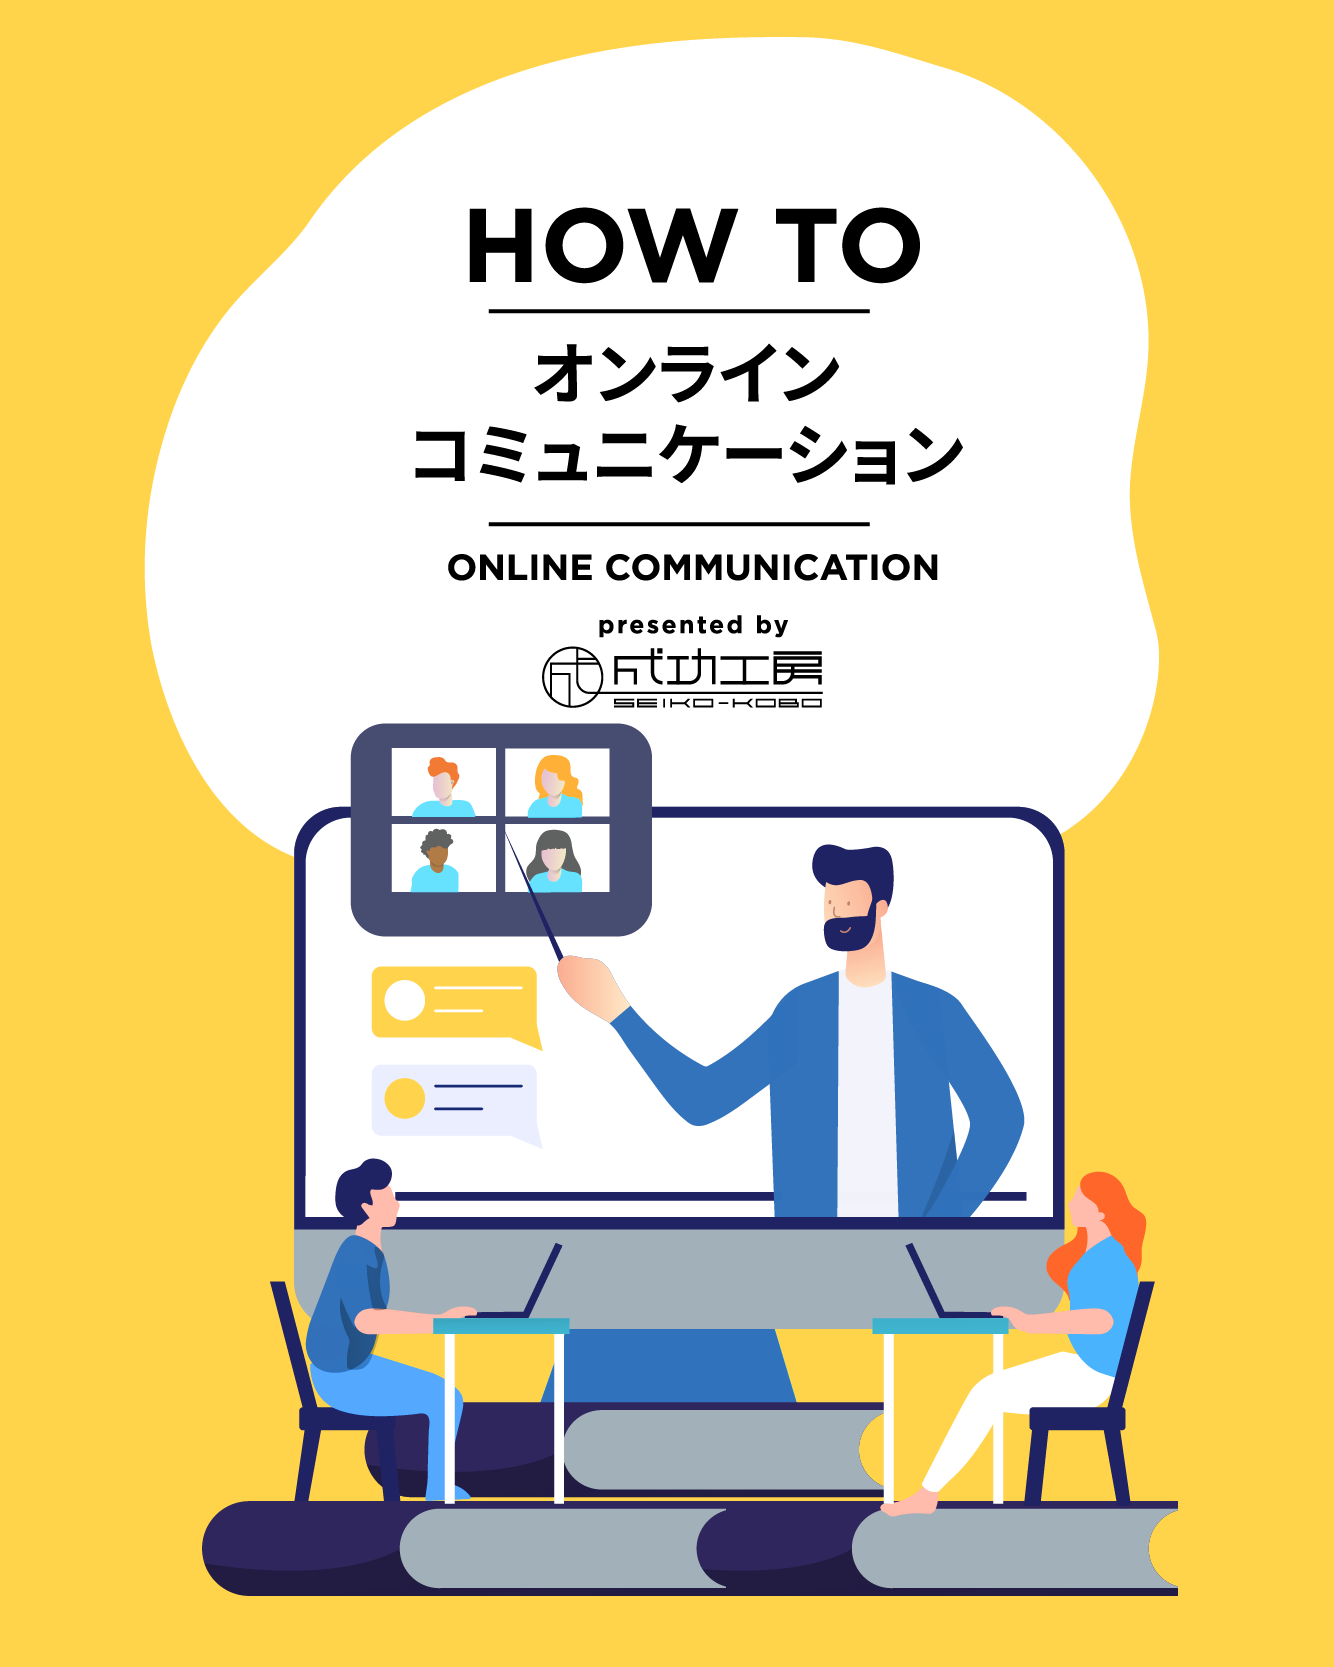 HOW TO コミュニケーション